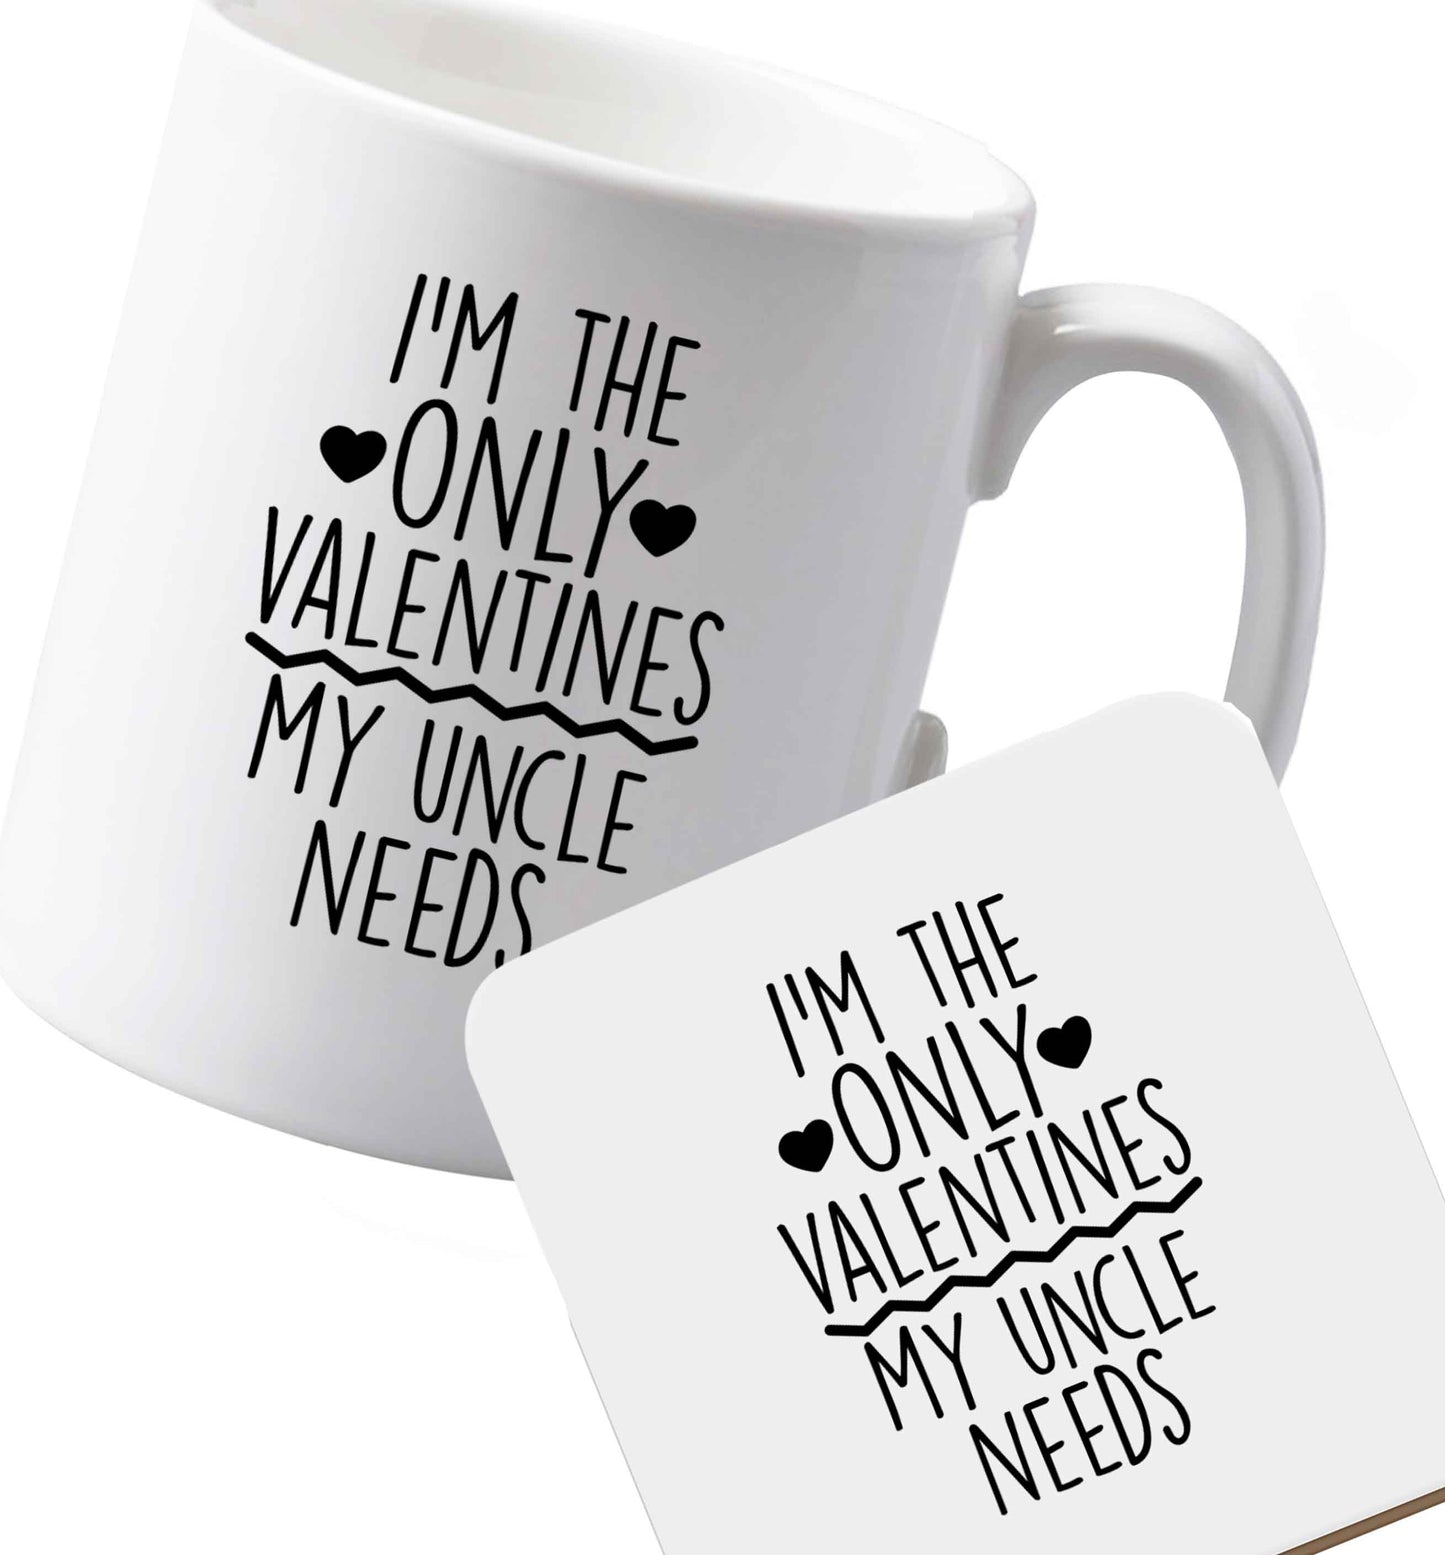 10 oz Ceramic mug and coaster I'm the only valentines my uncle needs both sides